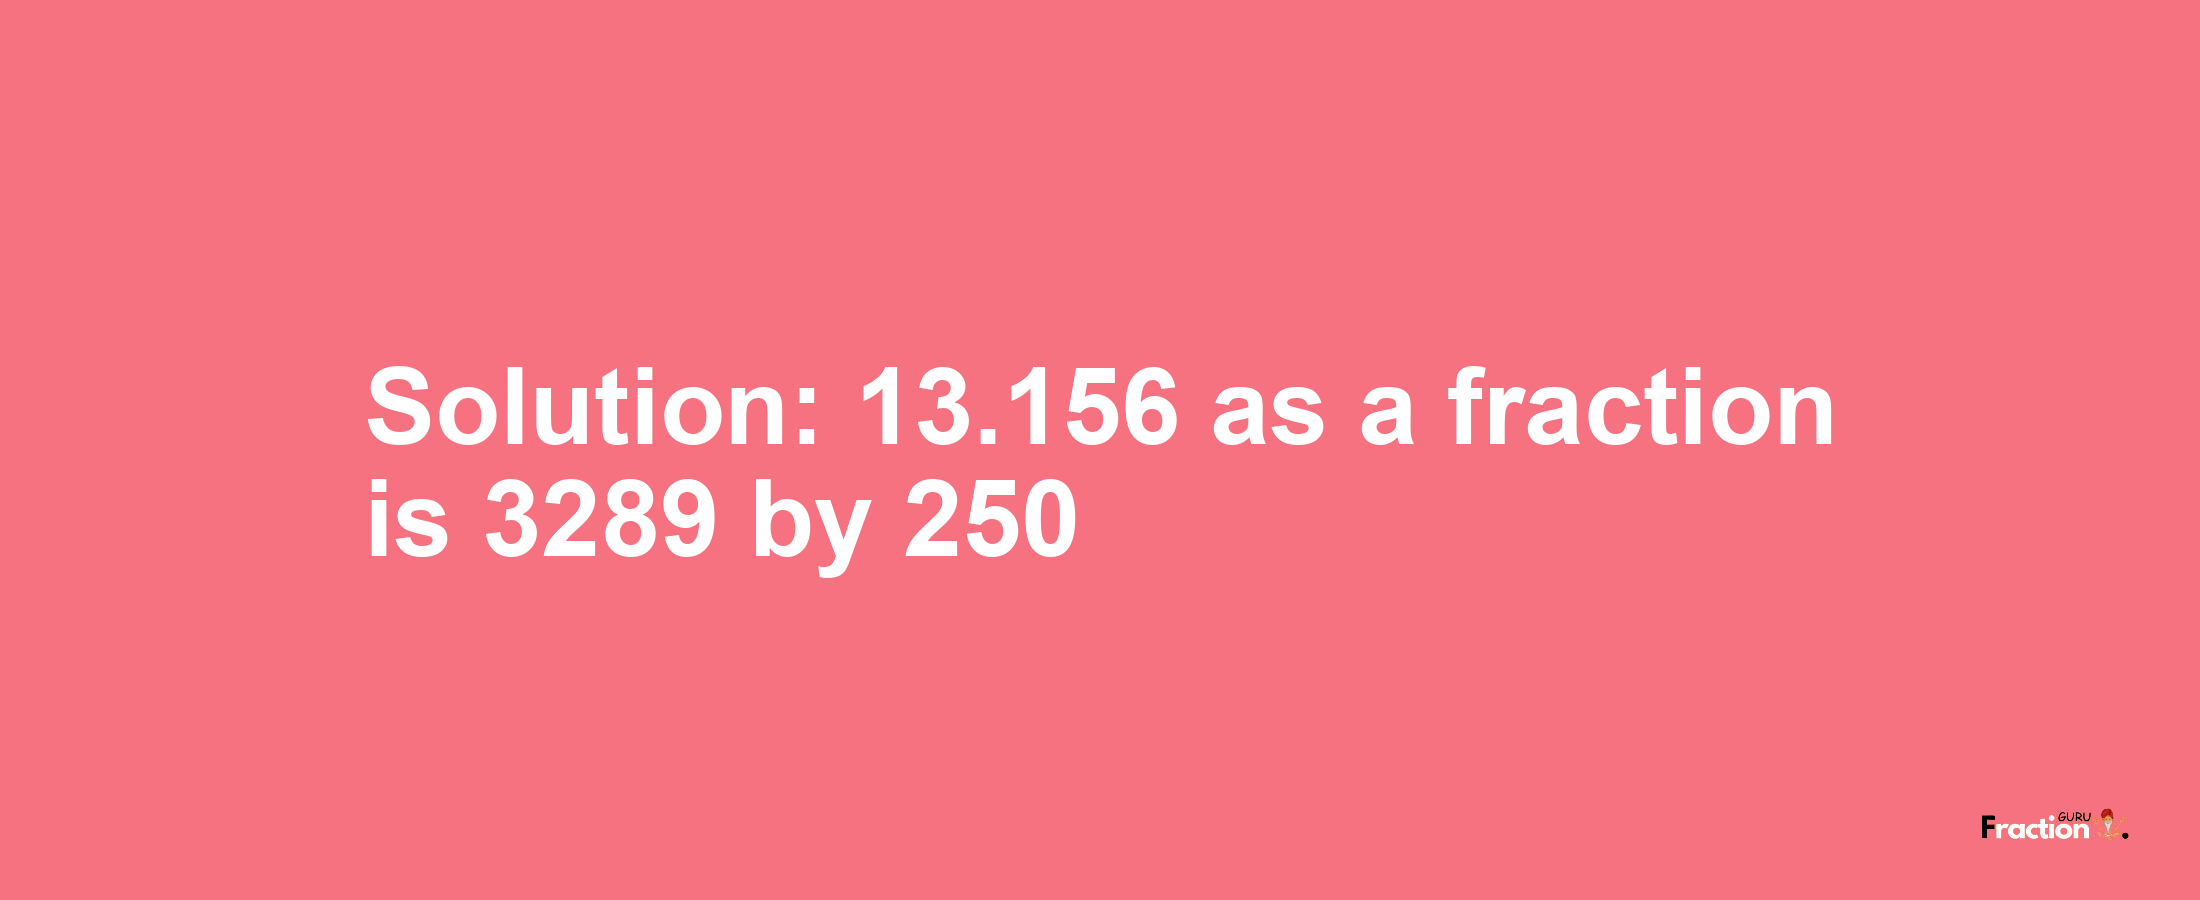 Solution:13.156 as a fraction is 3289/250